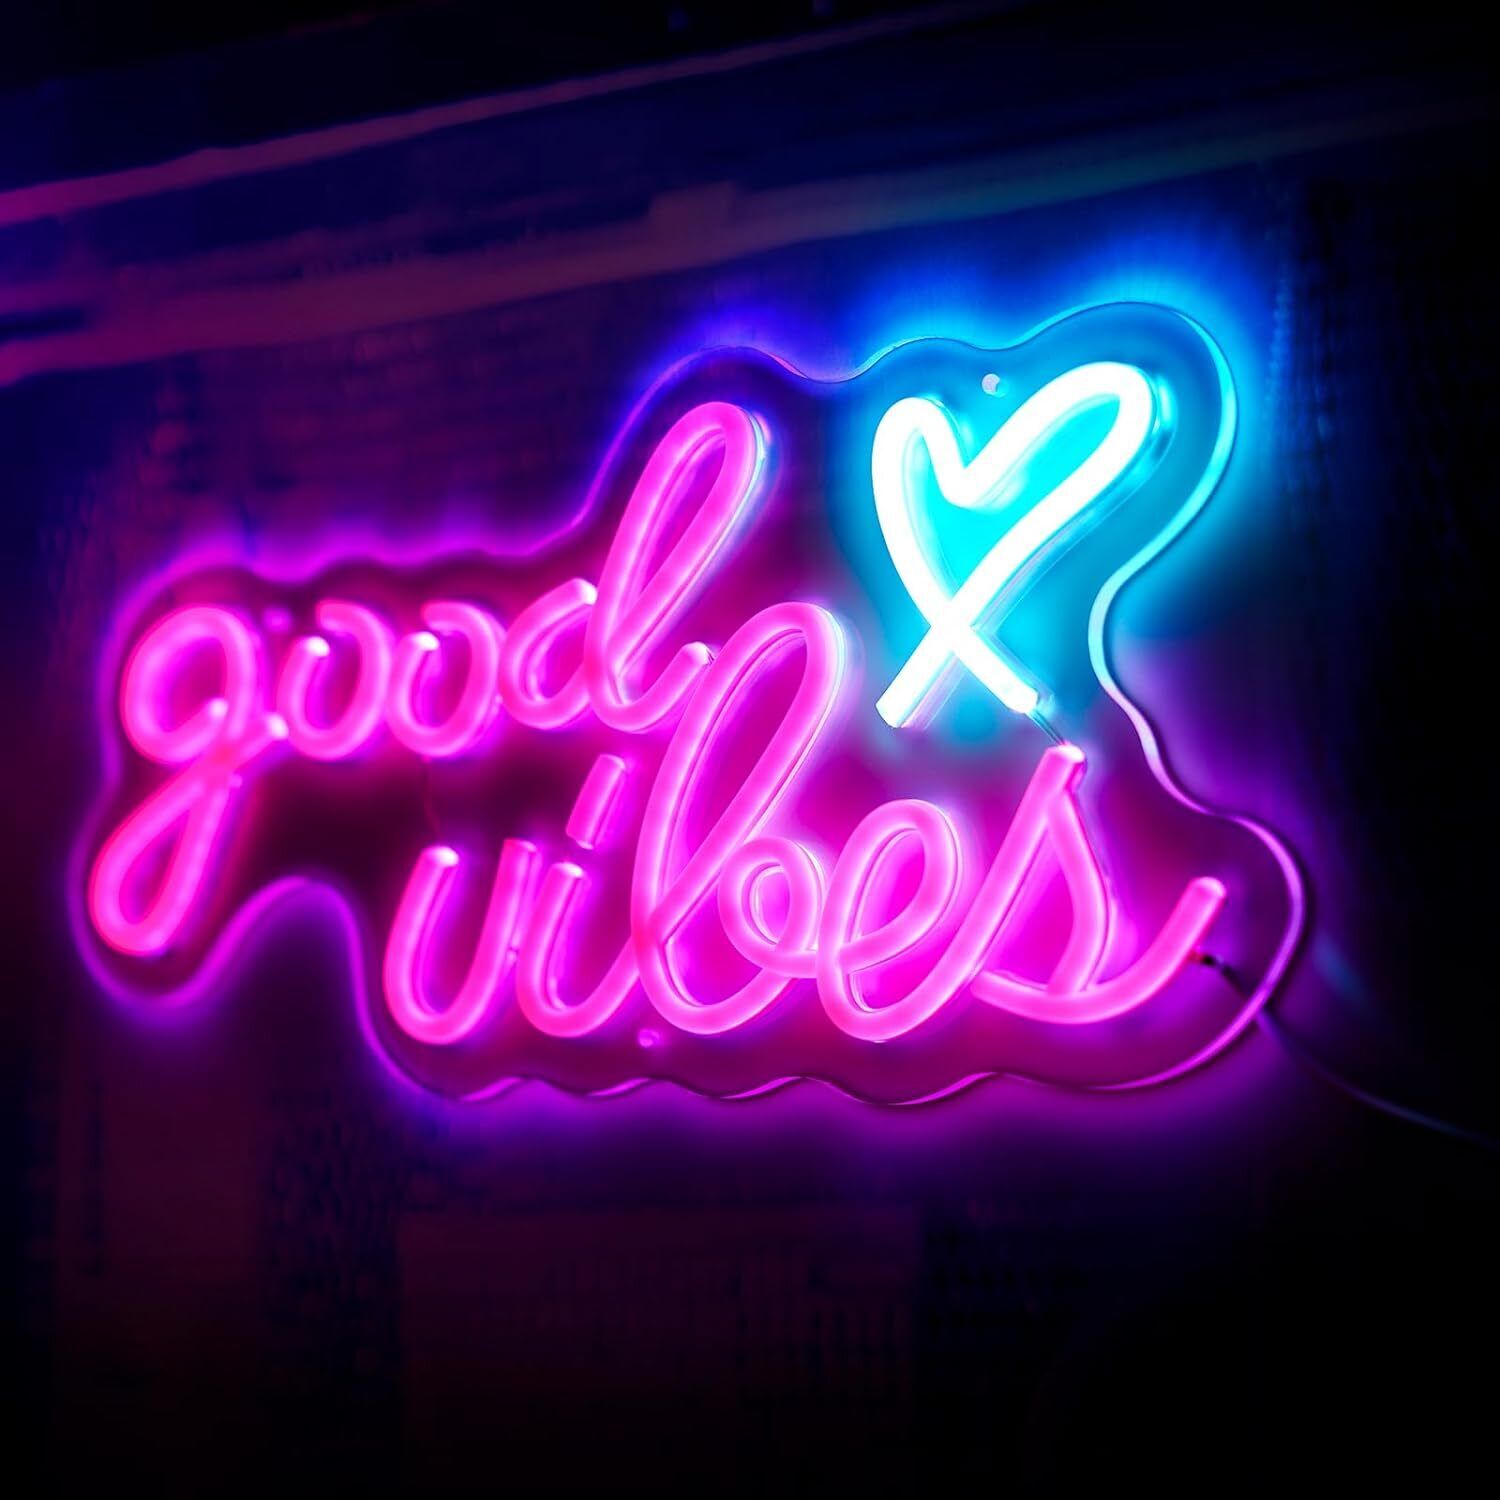 Pink Good Vibes Neon Signs Wall Love LED Lignt Powered Bar Room Decoration USB